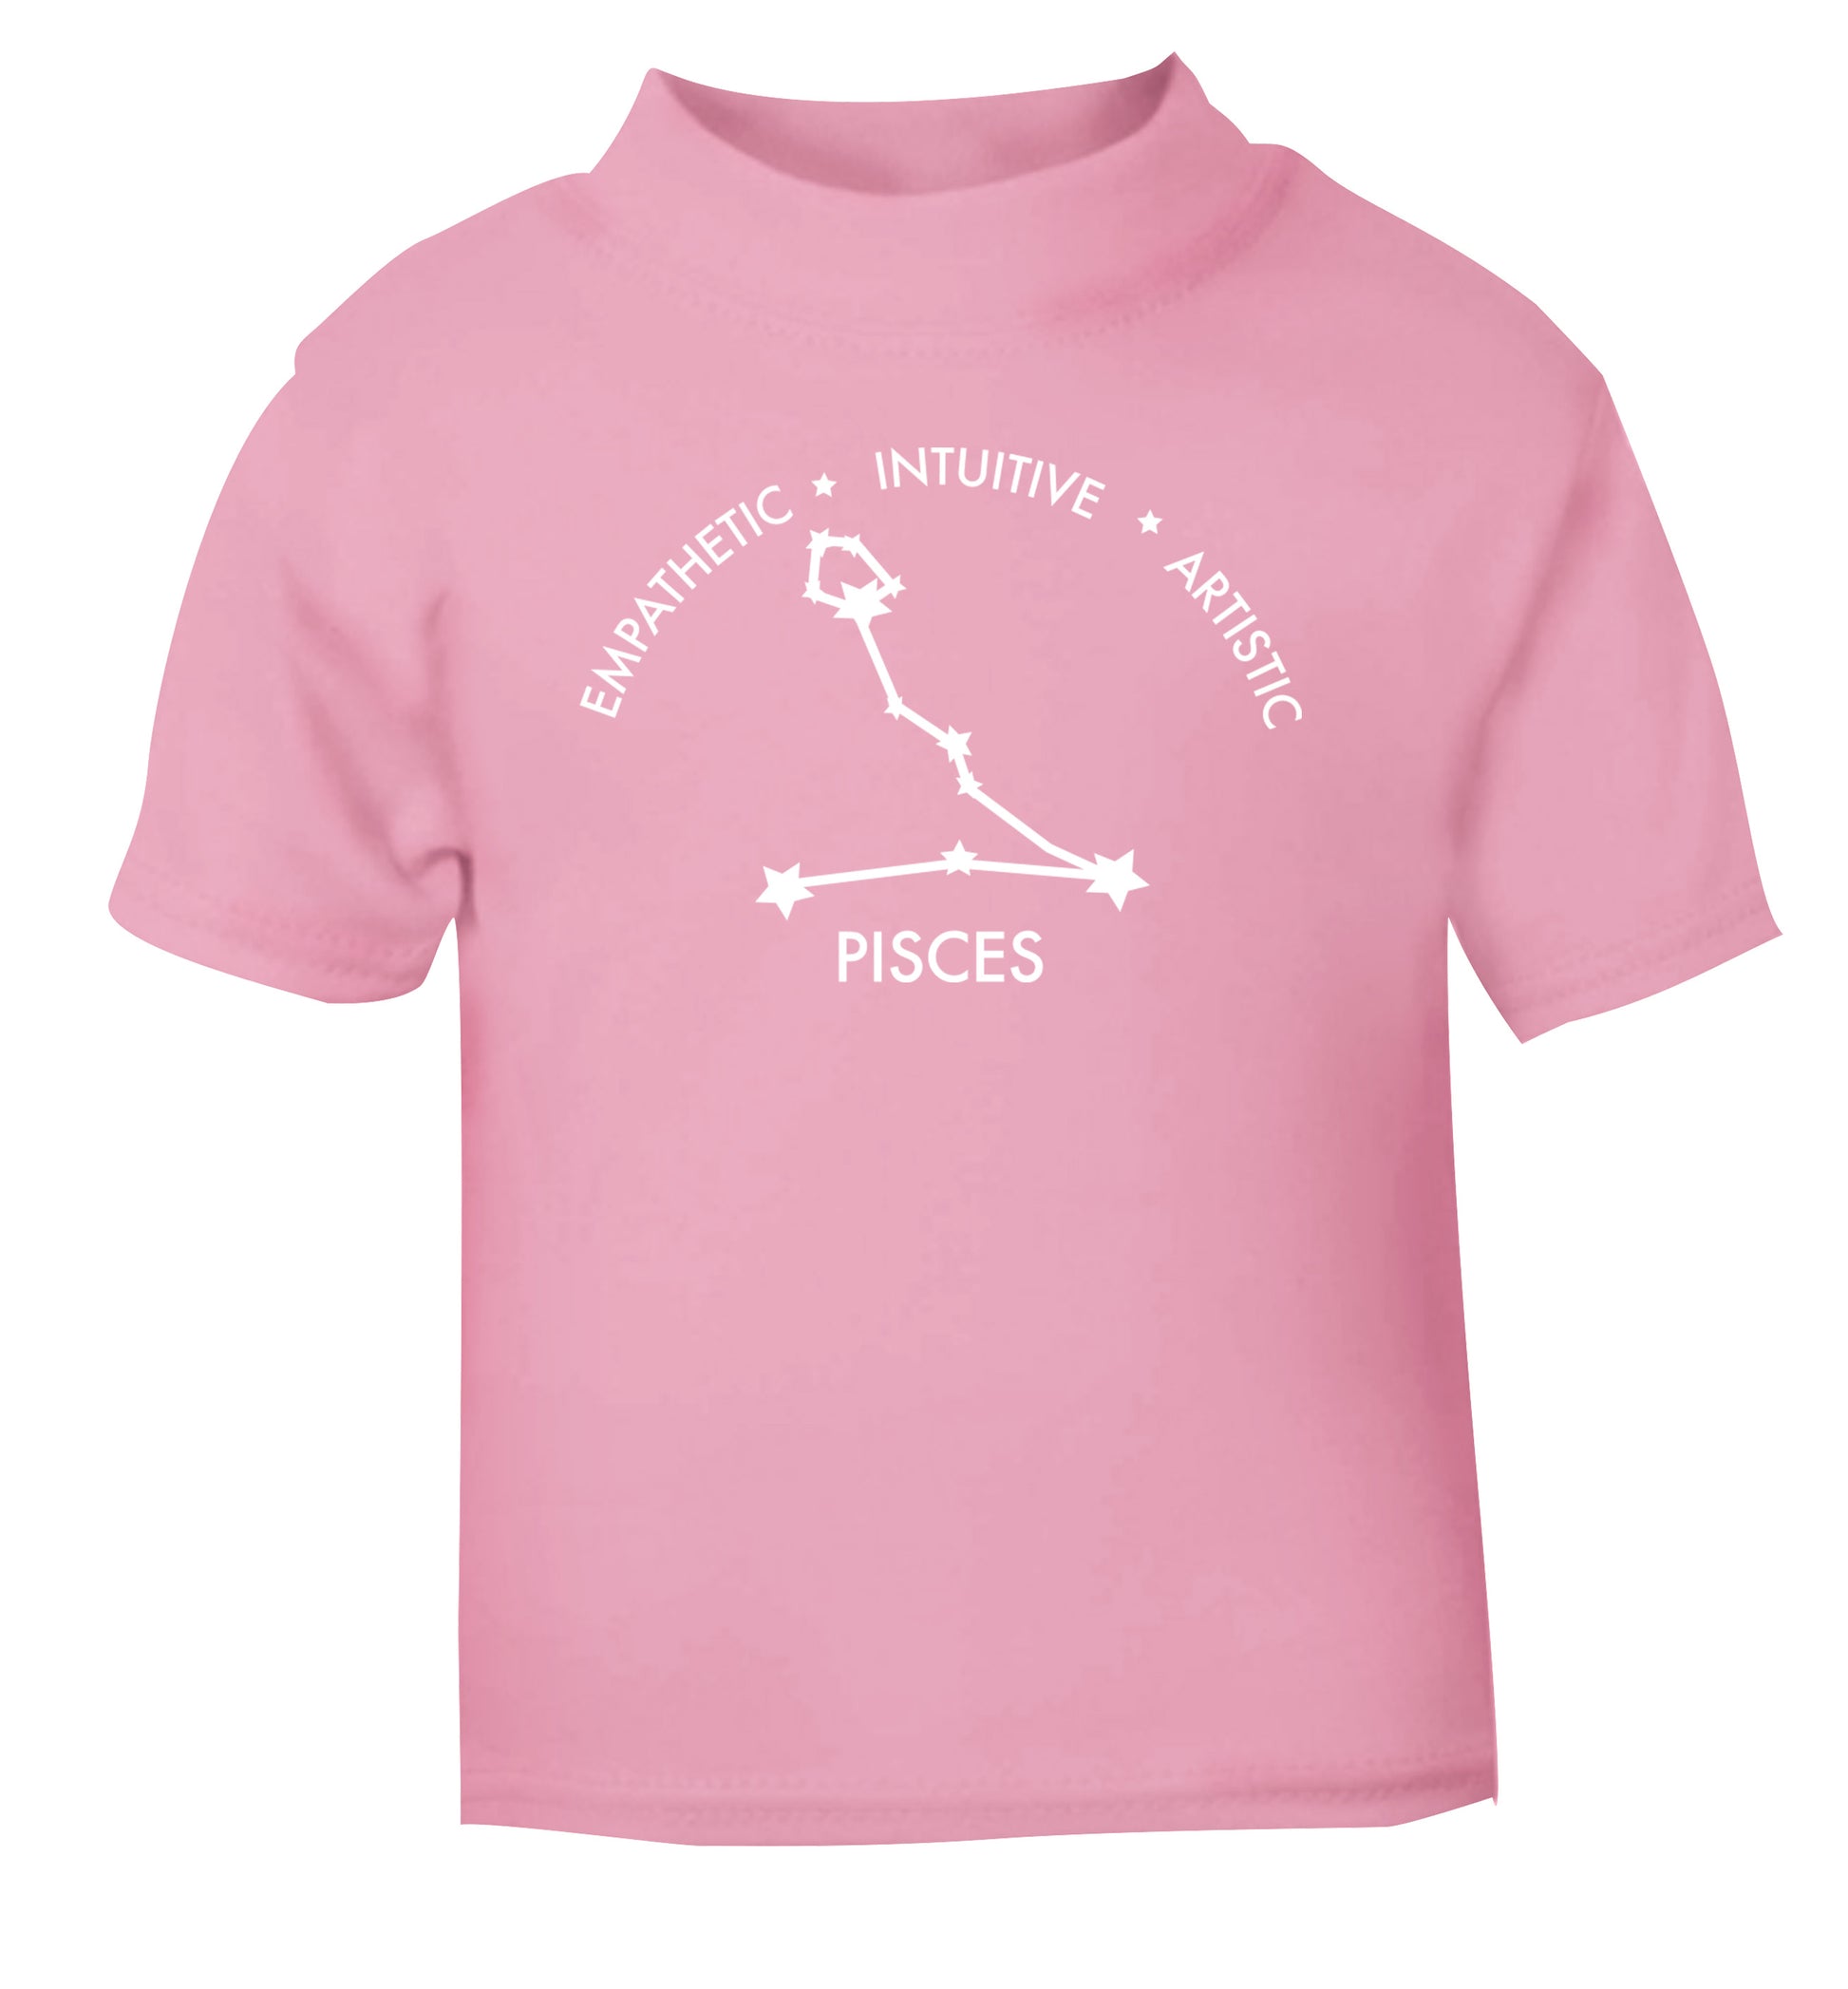 Pisces: Empathetic | Intuitive | Artistic light pink Baby Toddler Tshirt 2 Years